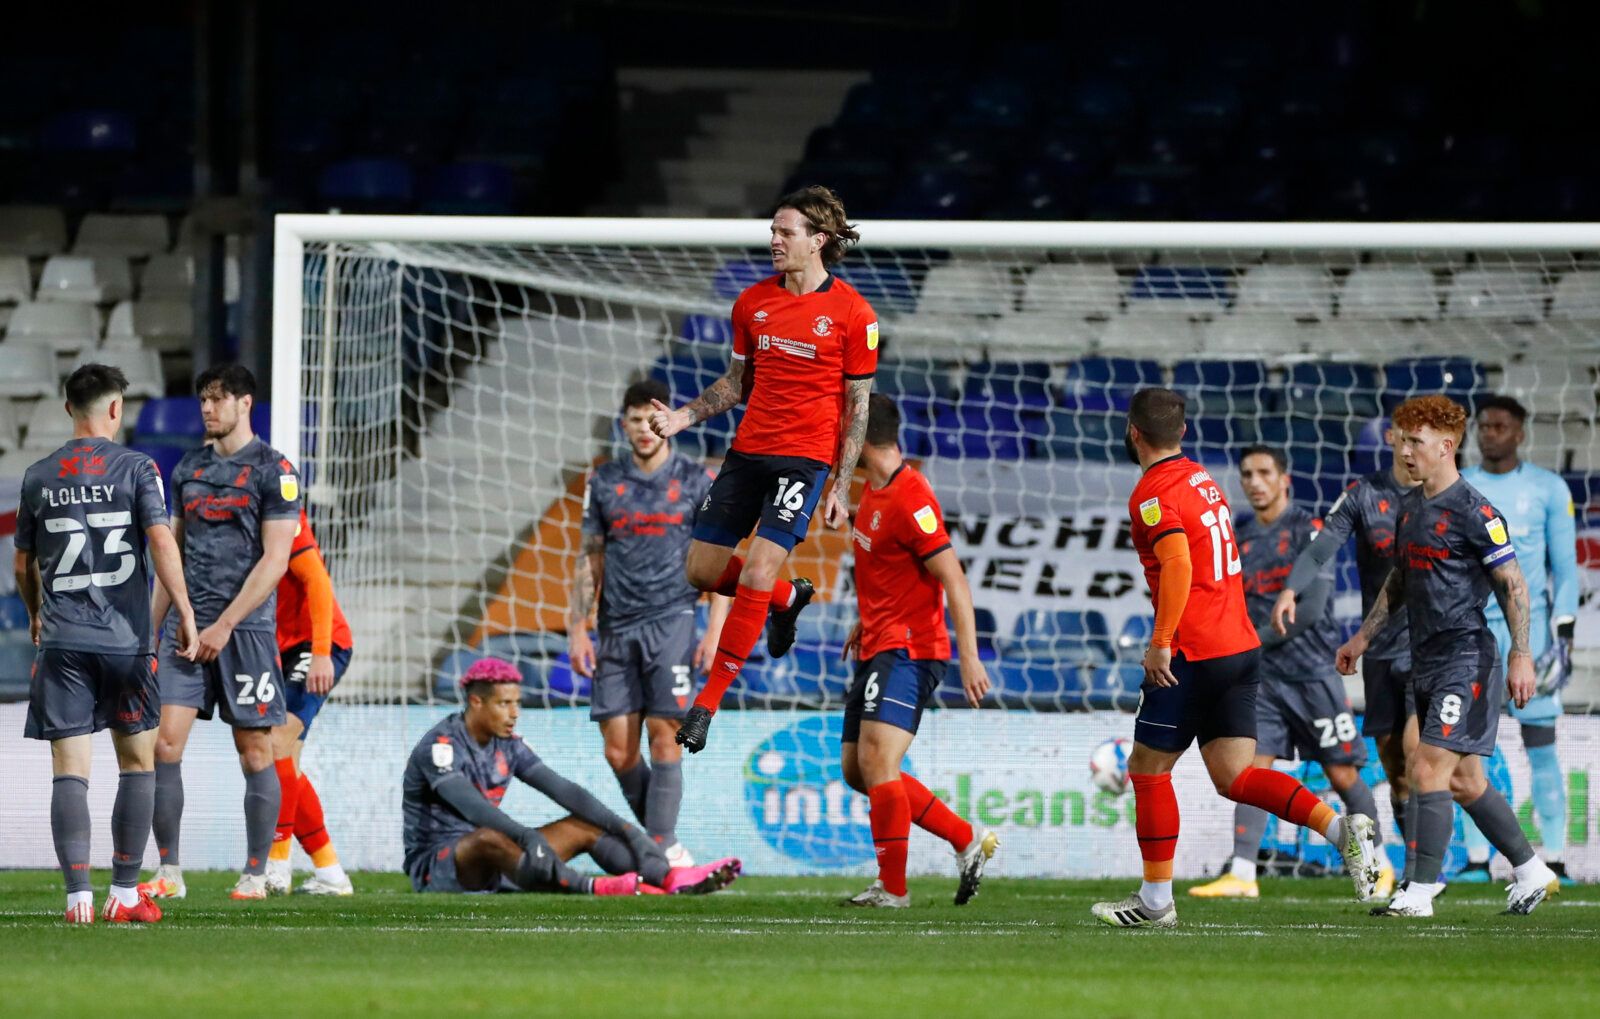 Soccer Football - Championship - Luton Town v Nottingham Forest - Kenilworth Road, Luton, Britain - October 28, 2020 Luton's Glen Rea celebrates scoring their first goal Action Images/Paul Childs EDITORIAL USE ONLY. No use with unauthorized audio, video, data, fixture lists, club/league logos or 'live' services. Online in-match use limited to 75 images, no video emulation. No use in betting, games or single club /league/player publications.  Please contact your account representative for further